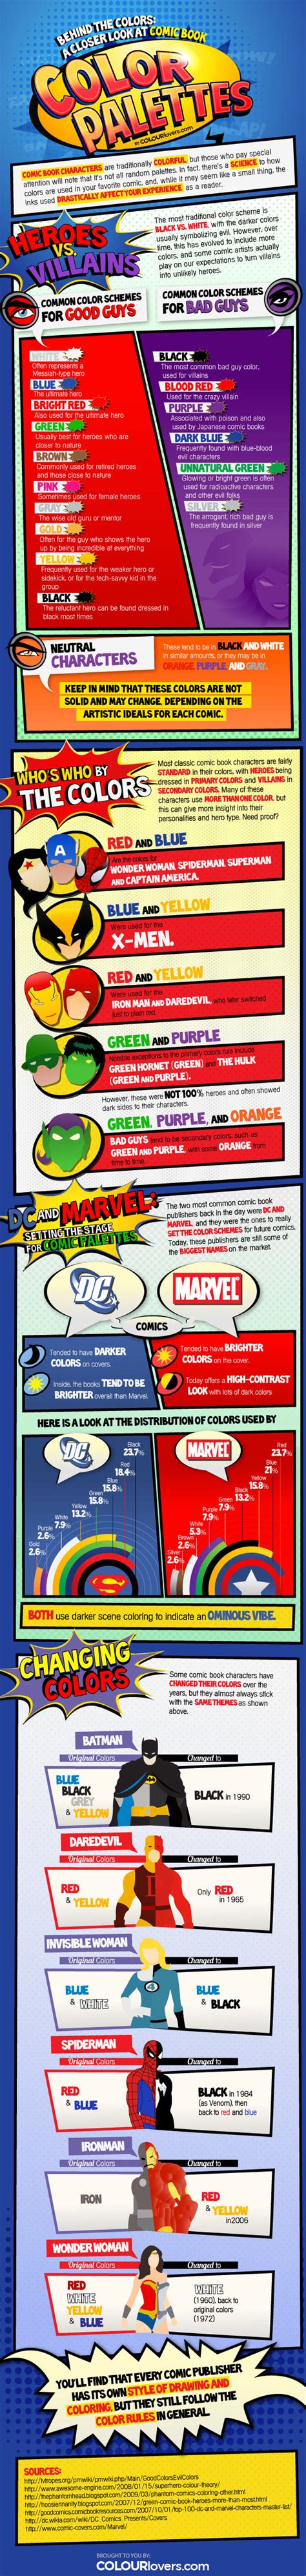 The Only Superhero Color Guide Youll Ever Need